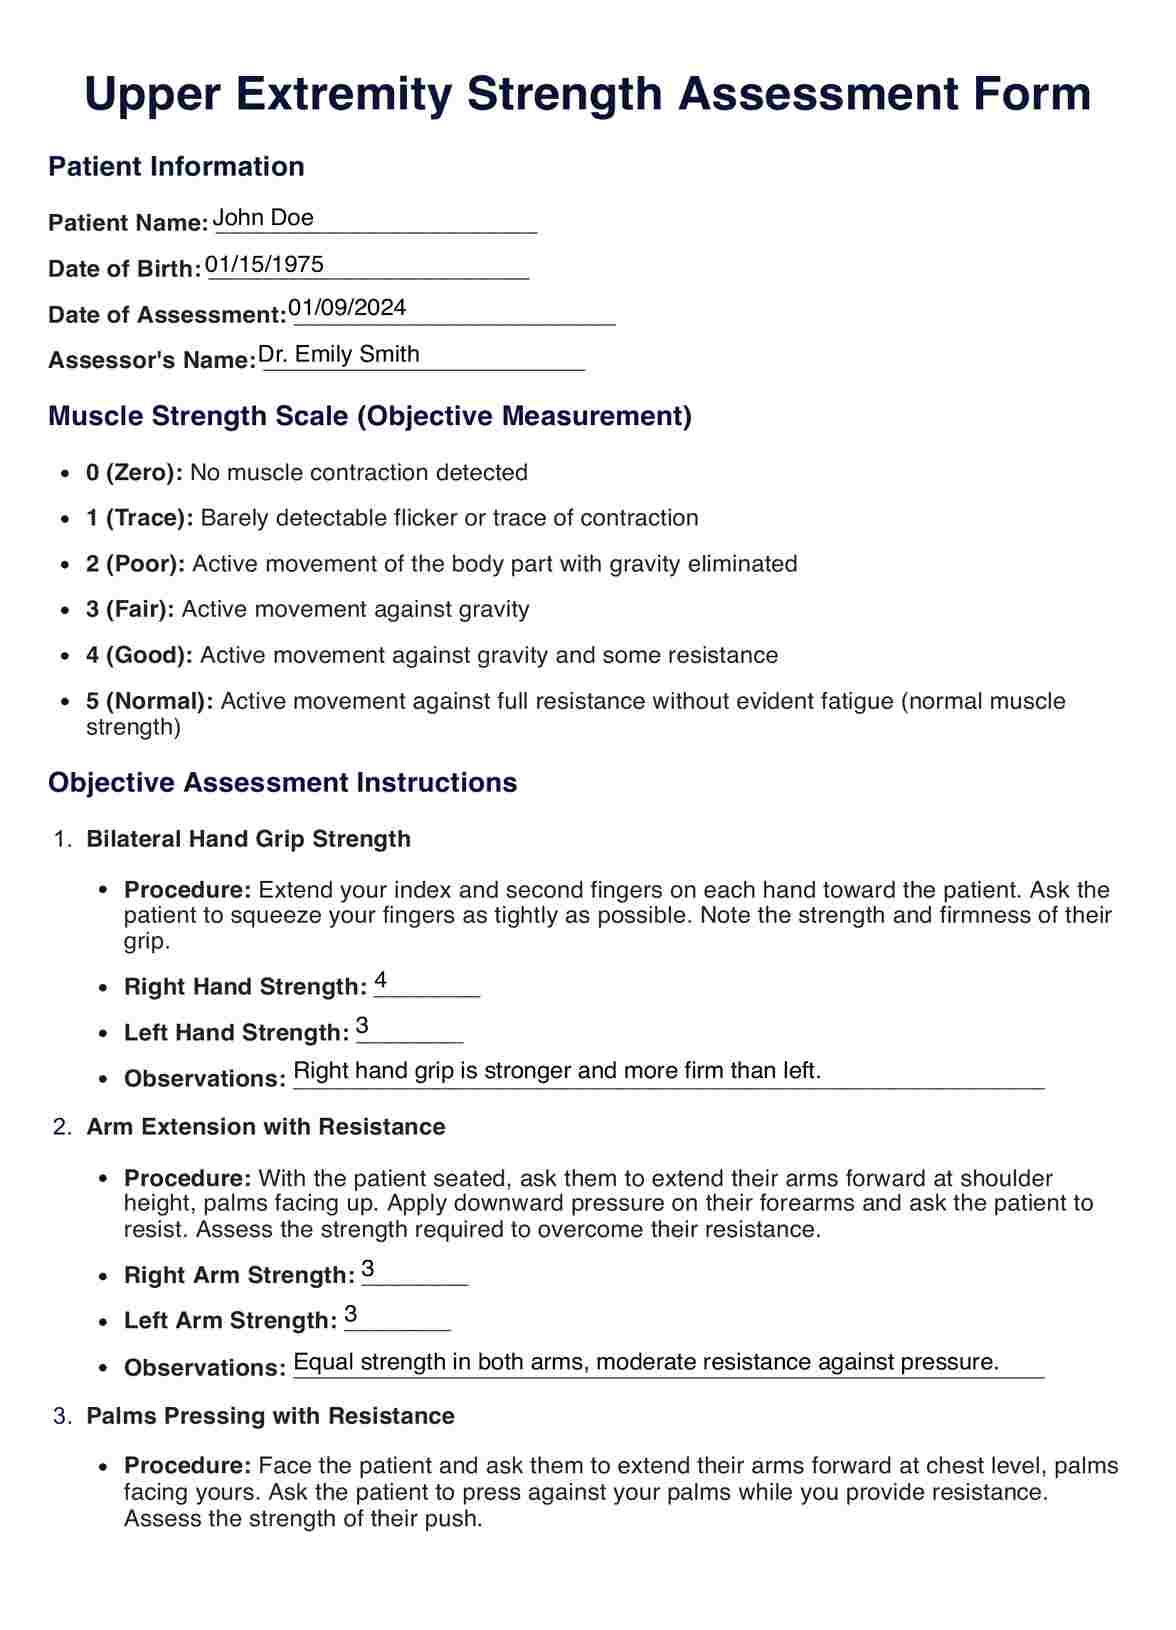 Upper Extremity Strength Assessment PDF Example